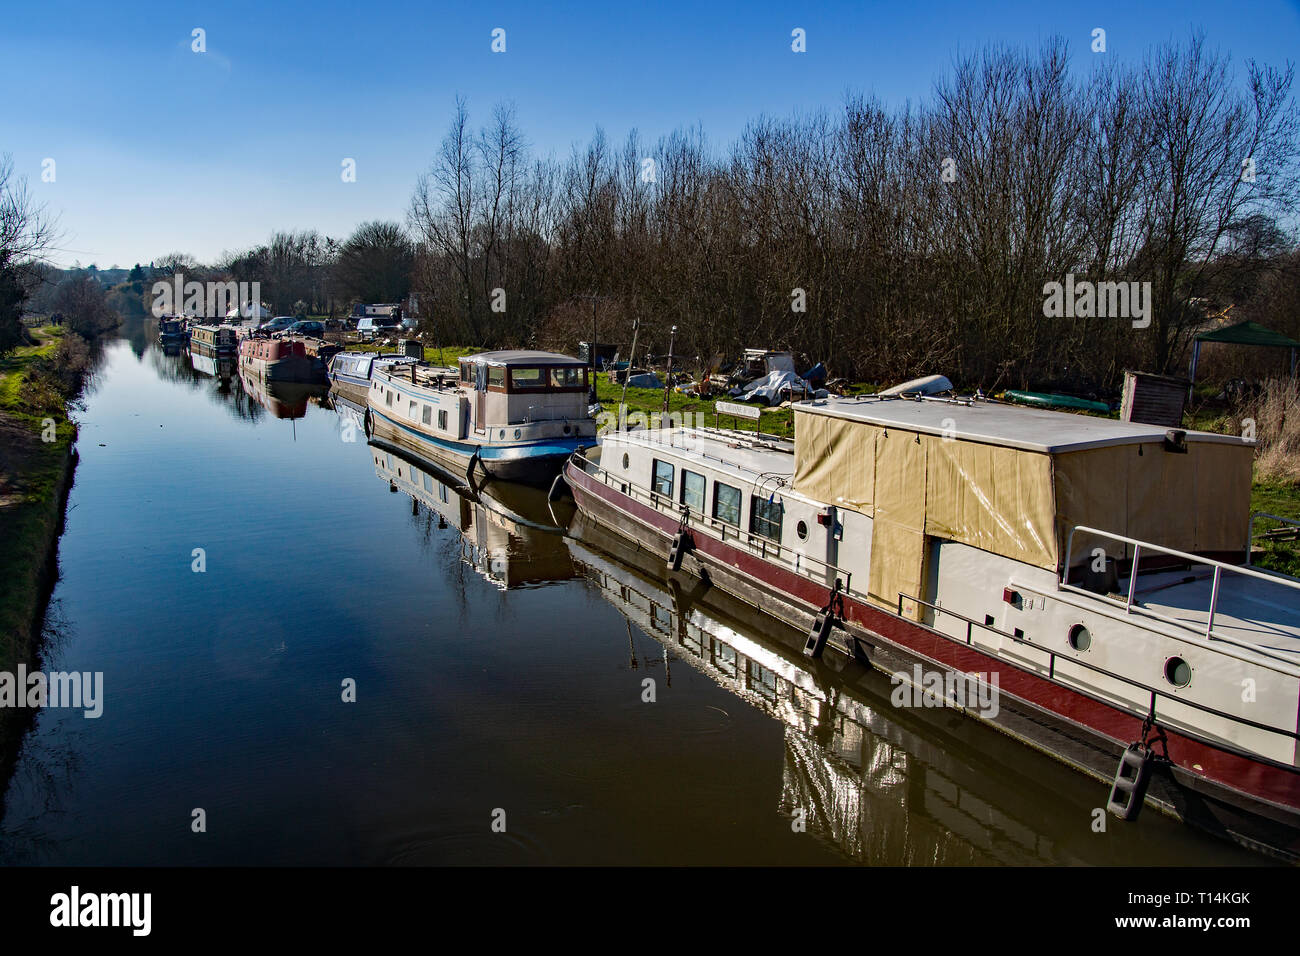 The canal boat and repair yard in Sawbridgeworth with derelict canal boats awaiting repairs on a sunny day in winter. Stock Photo